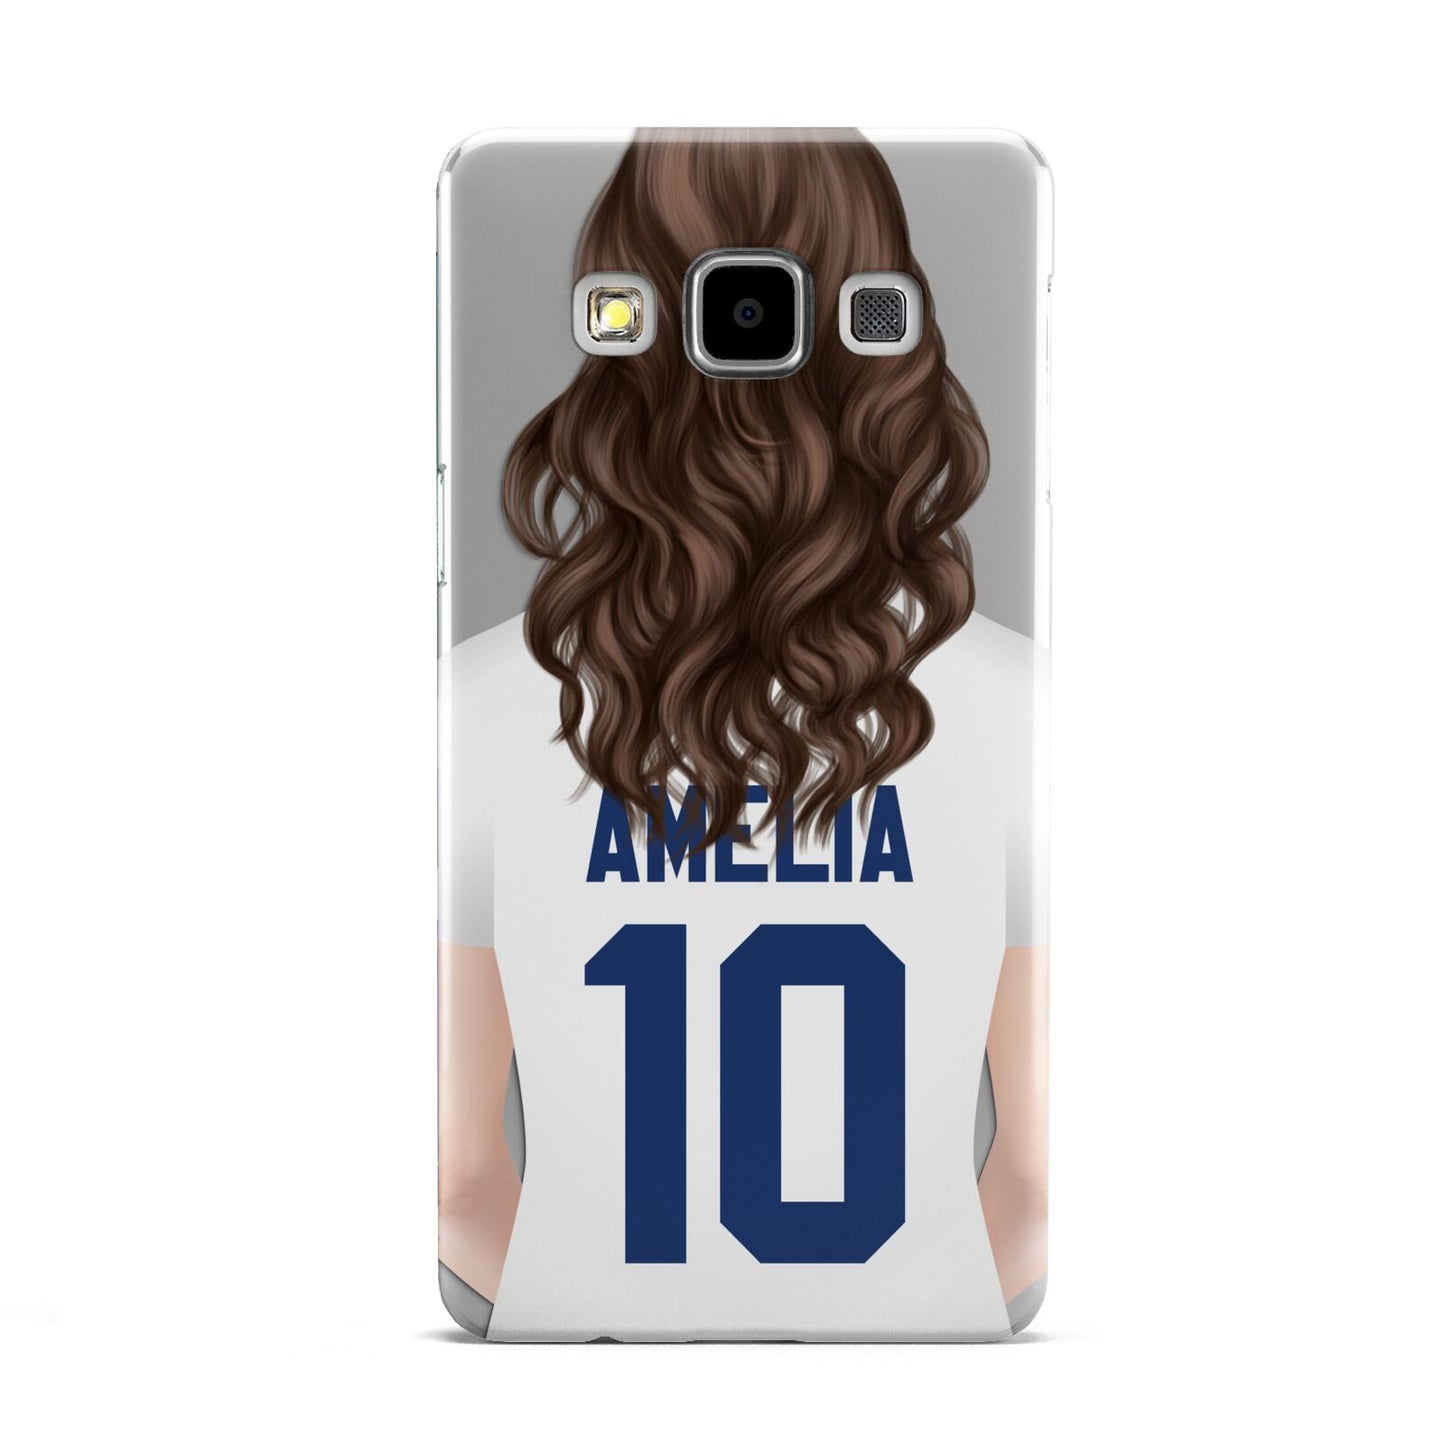 Womens Footballer Personalised Samsung Galaxy A5 Case